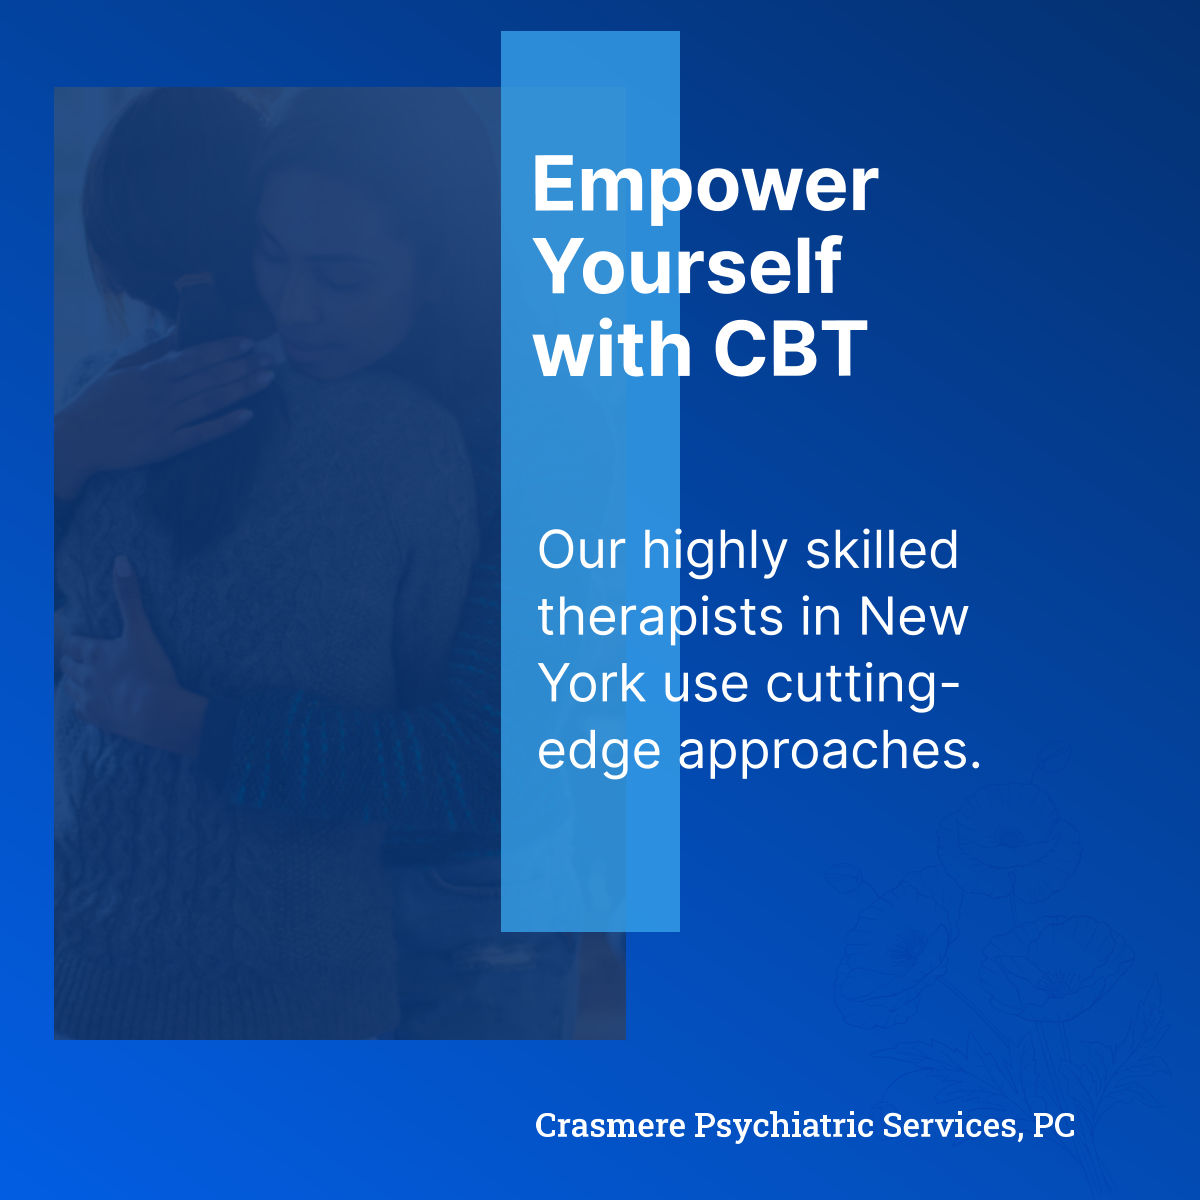 Change your thoughts and change your life with Cognitive Behavioral Therapy (CBT) at Crasmere Psychiatric Services. You can learn to manage anxiety, depression, and other mental health challenges.
 
#StatenIslandNY #PsychiatricServices #CognitiveBehavioralTherapy #MentalHealth